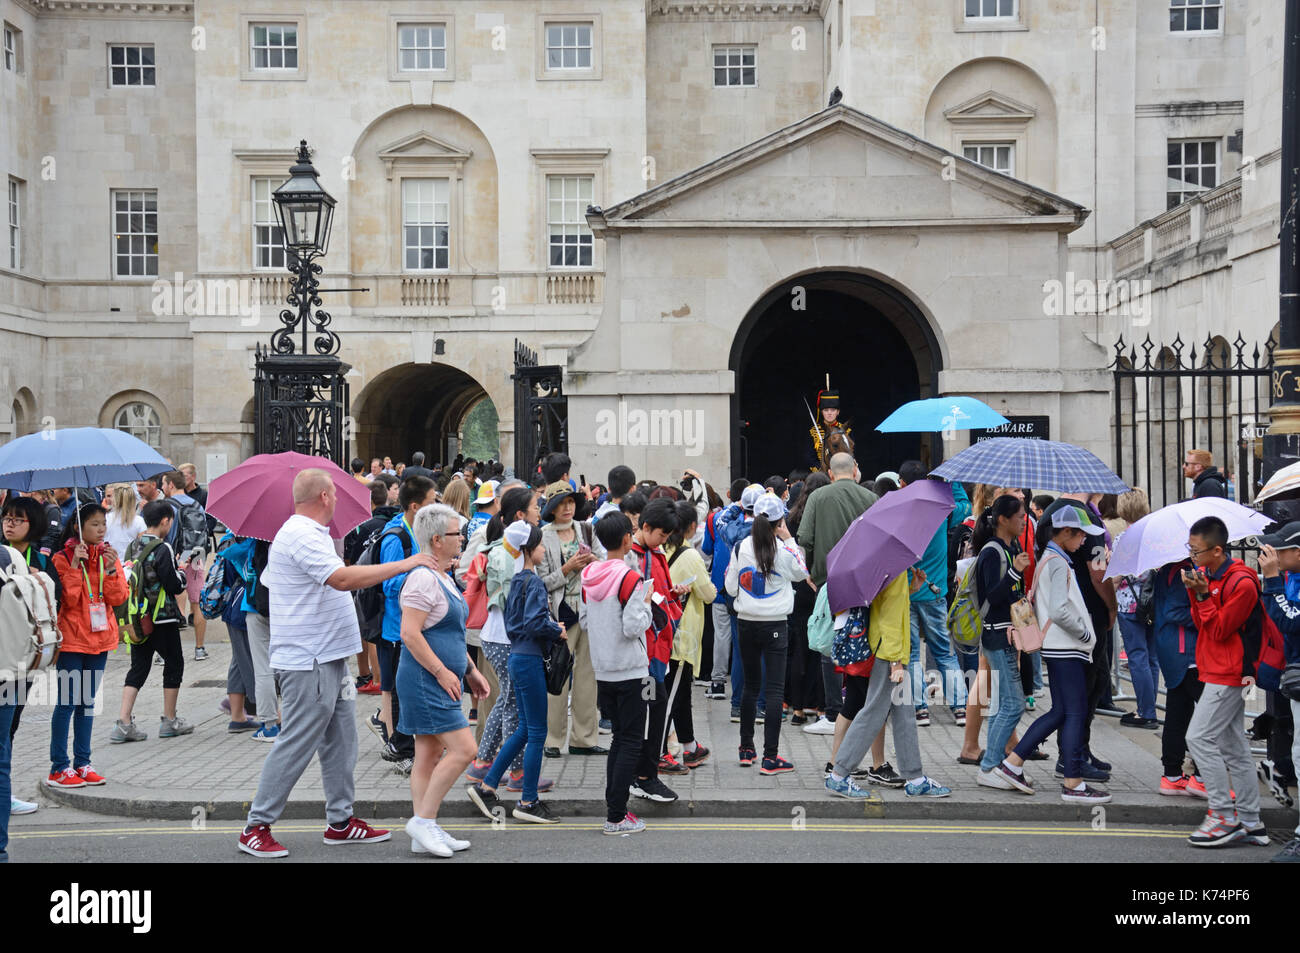 Many tourists, passing horse guards, on Whitehall, London Stock Photo